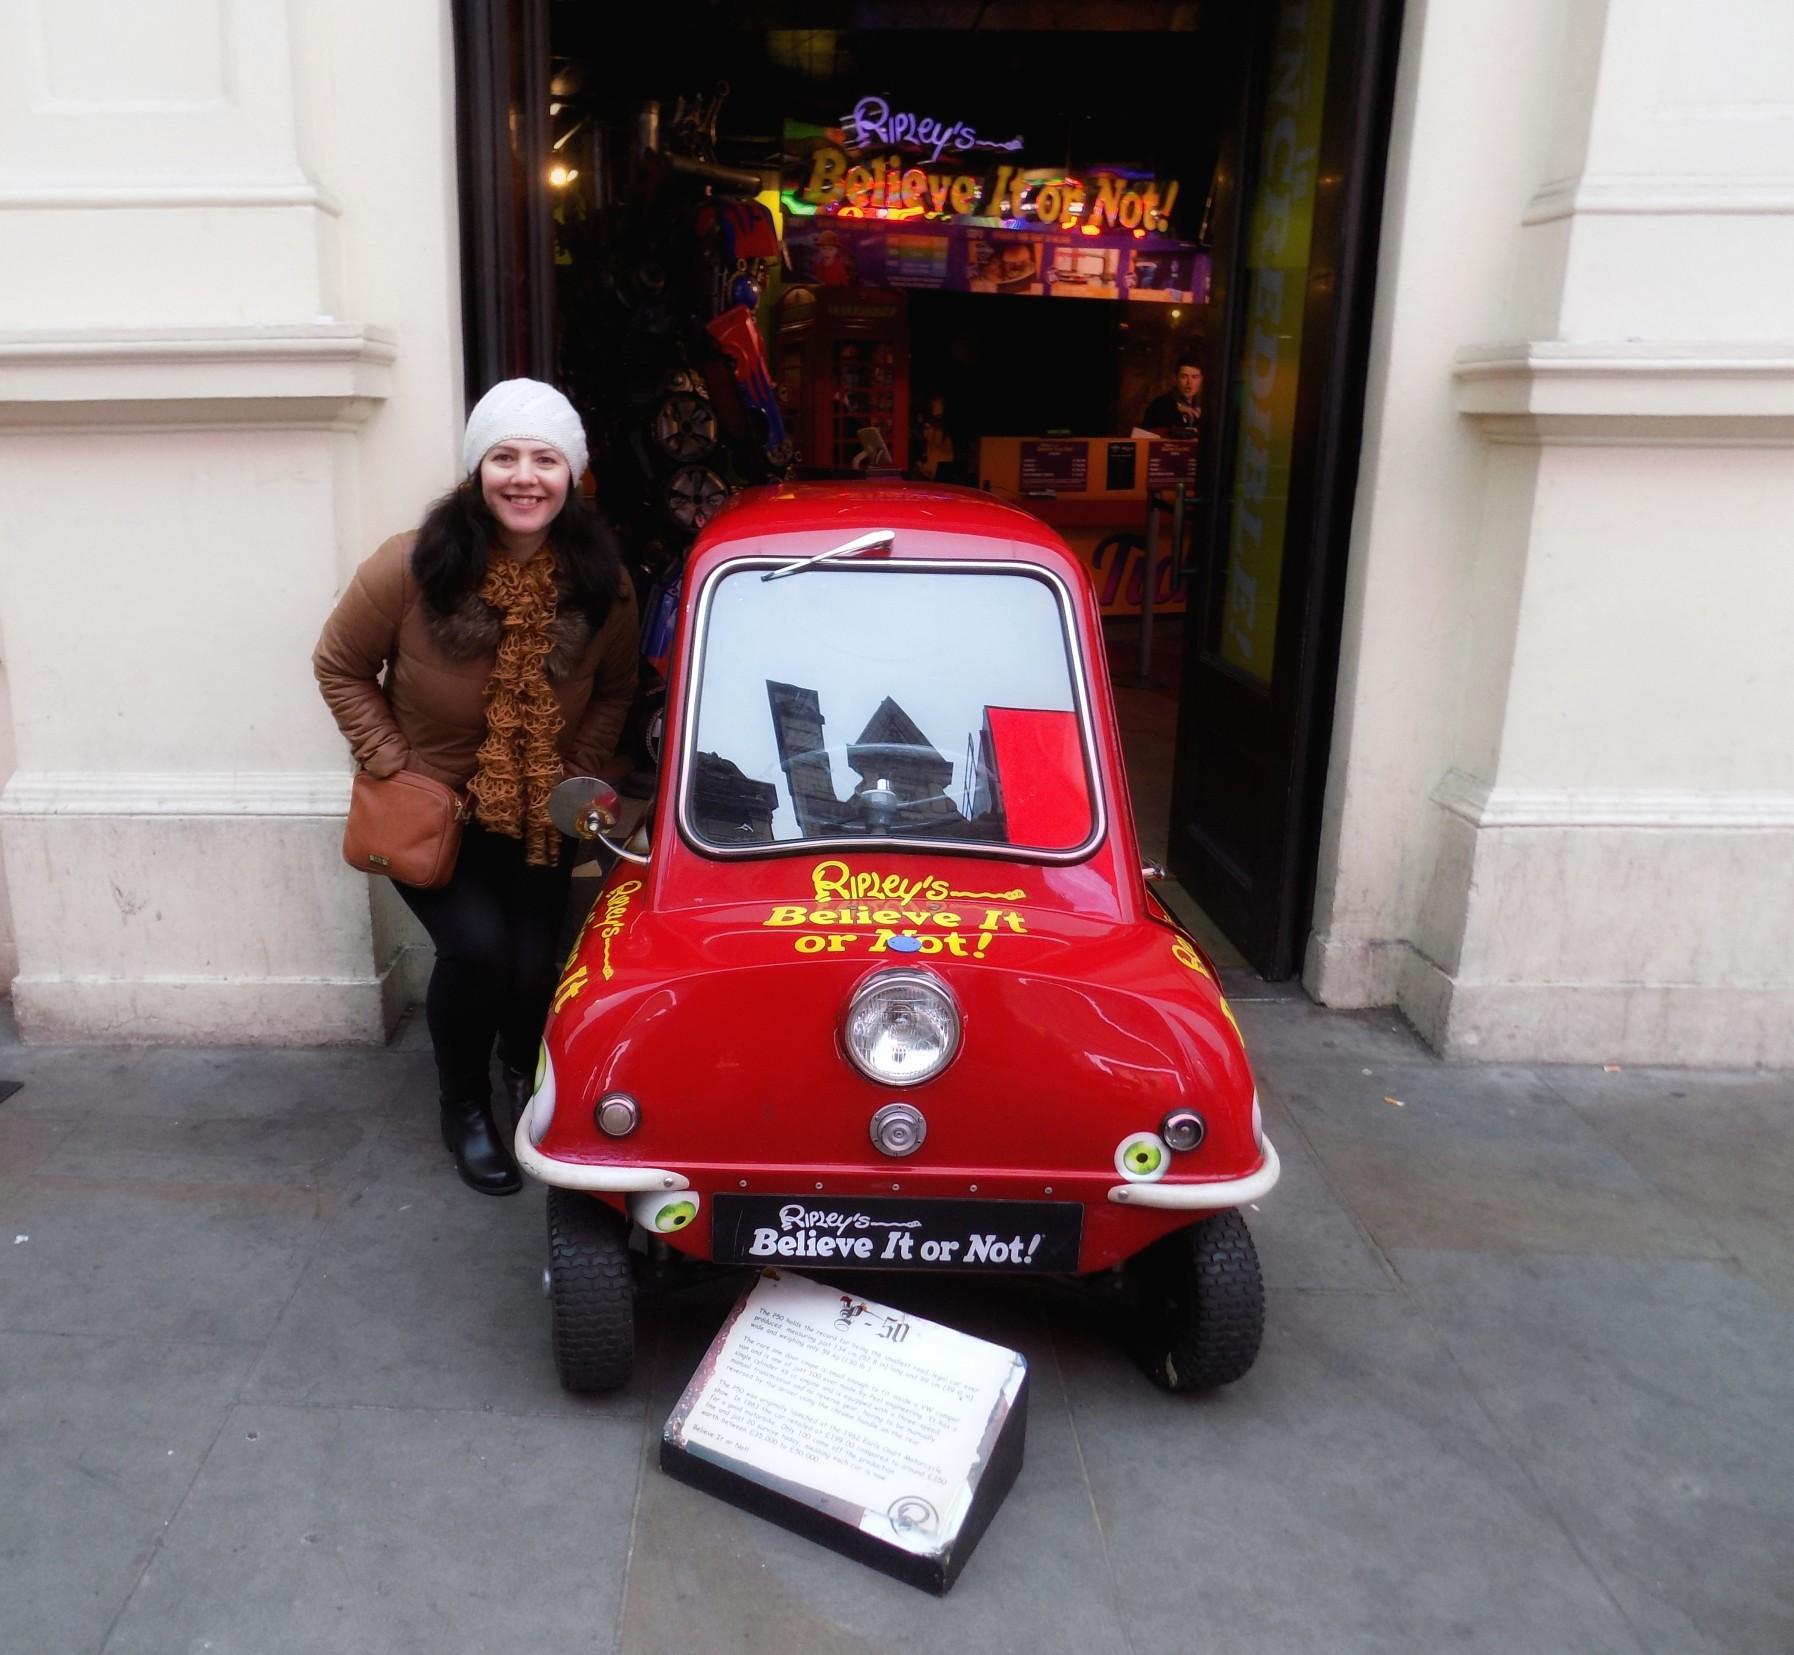 A woman standing next to the smallest car in the world.